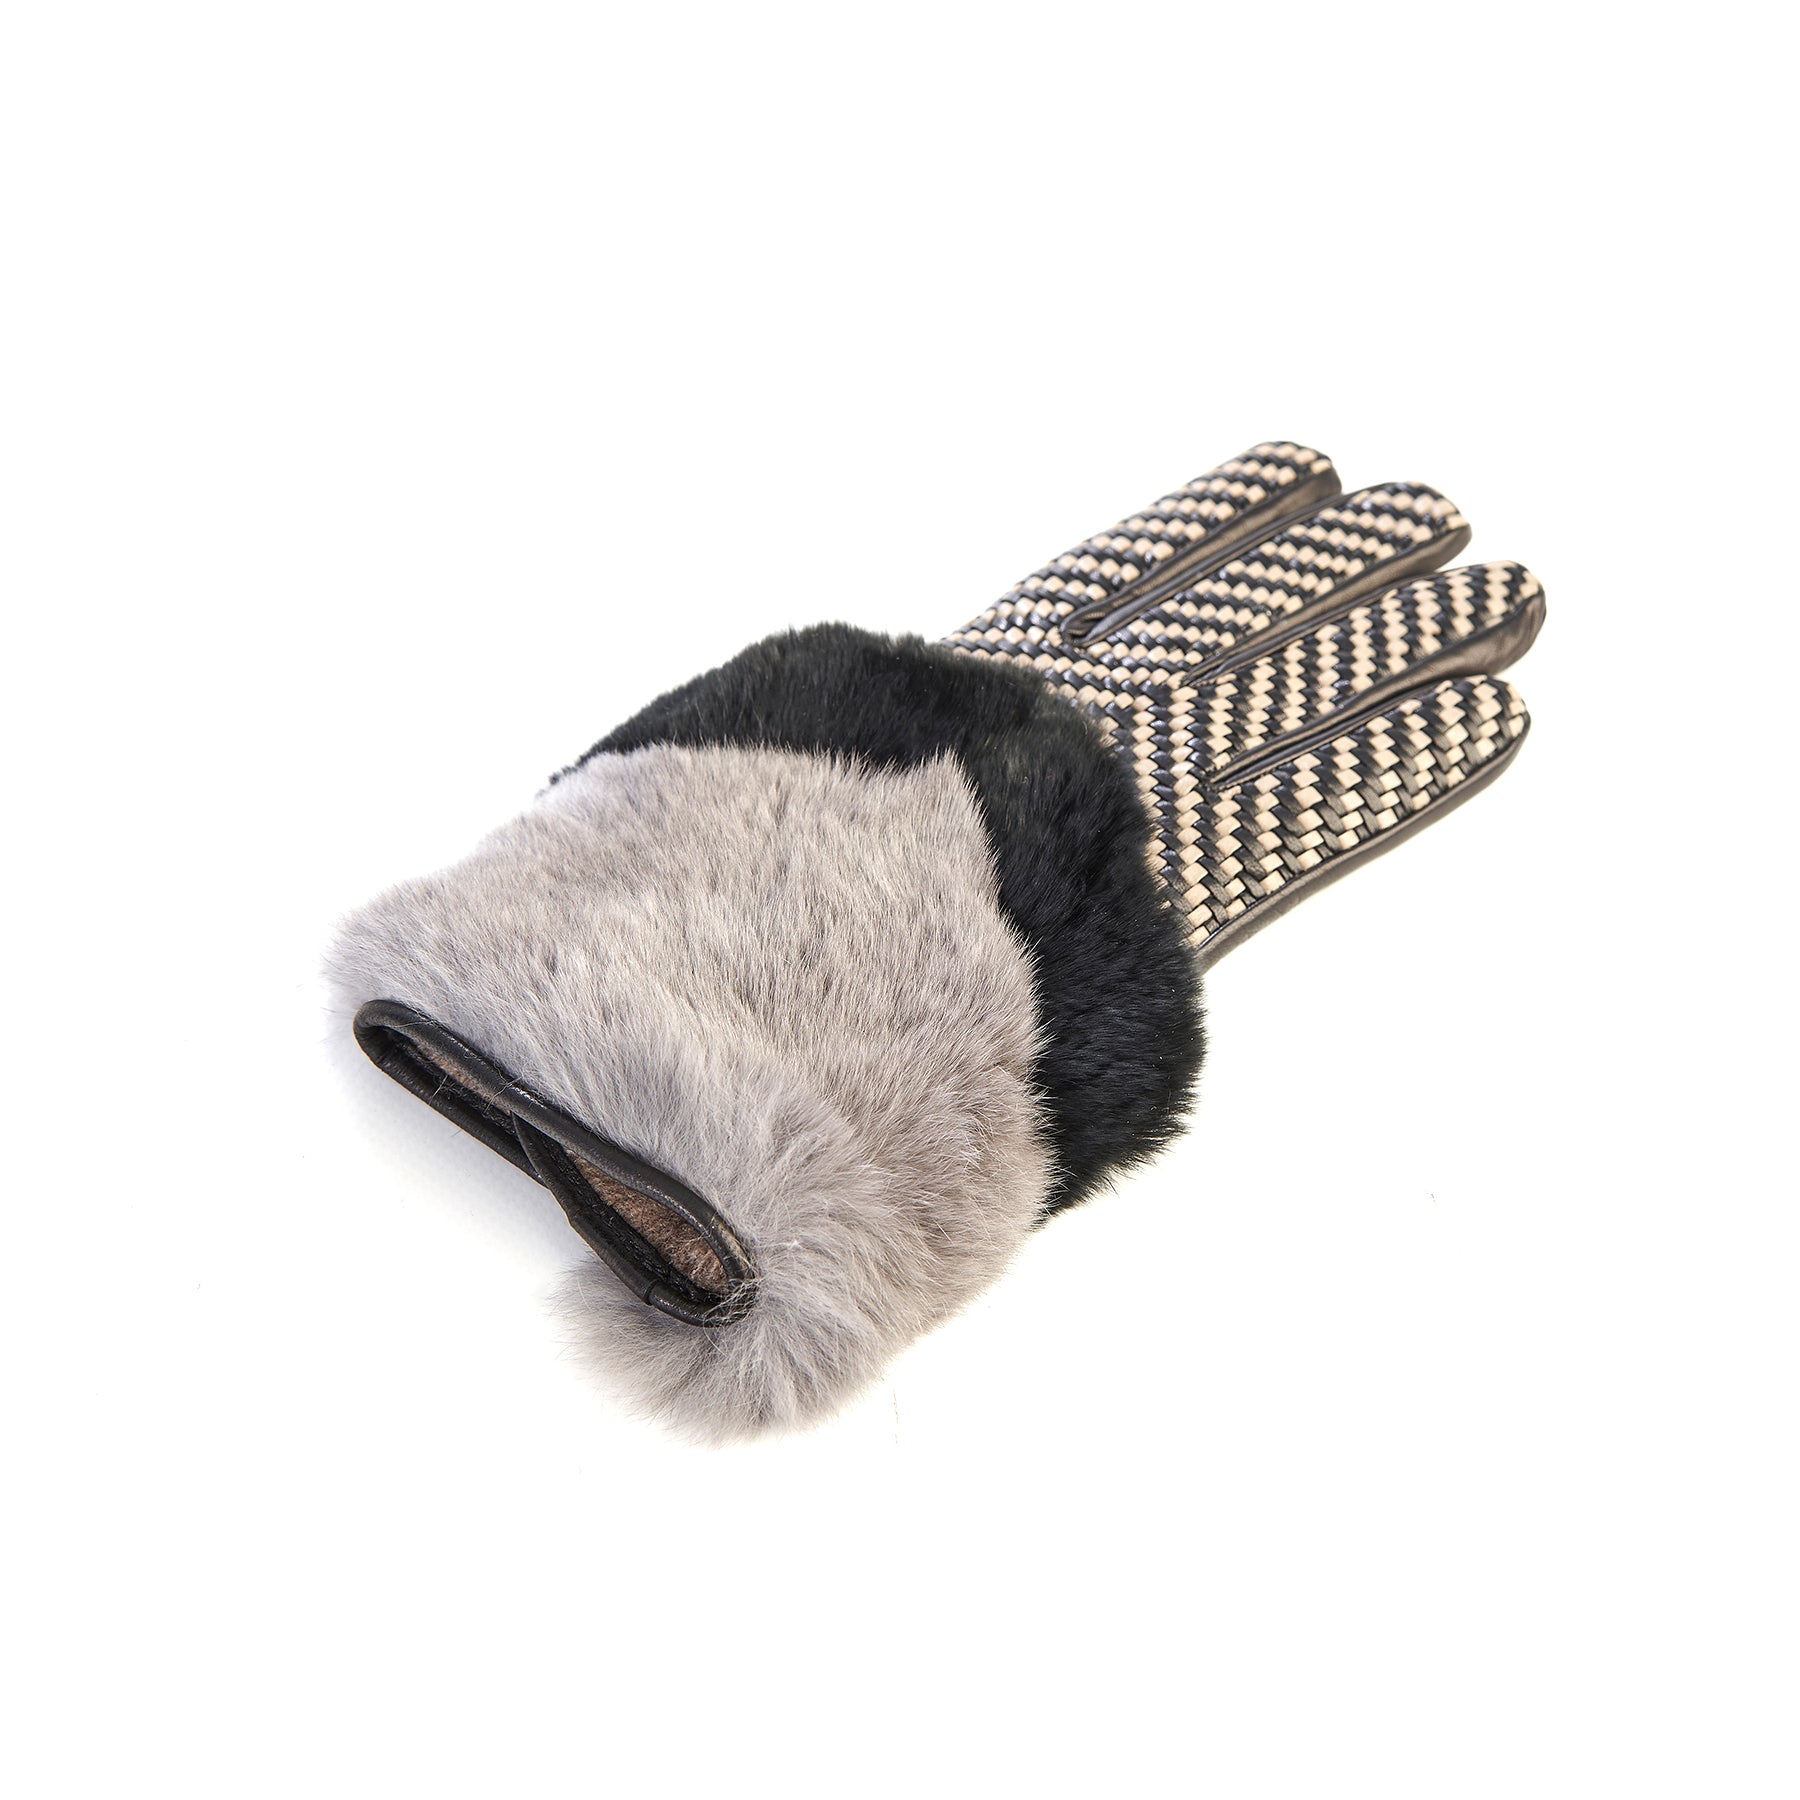 Women's black leather gloves with bicolor woven top panel and rex rabbit fur cuff